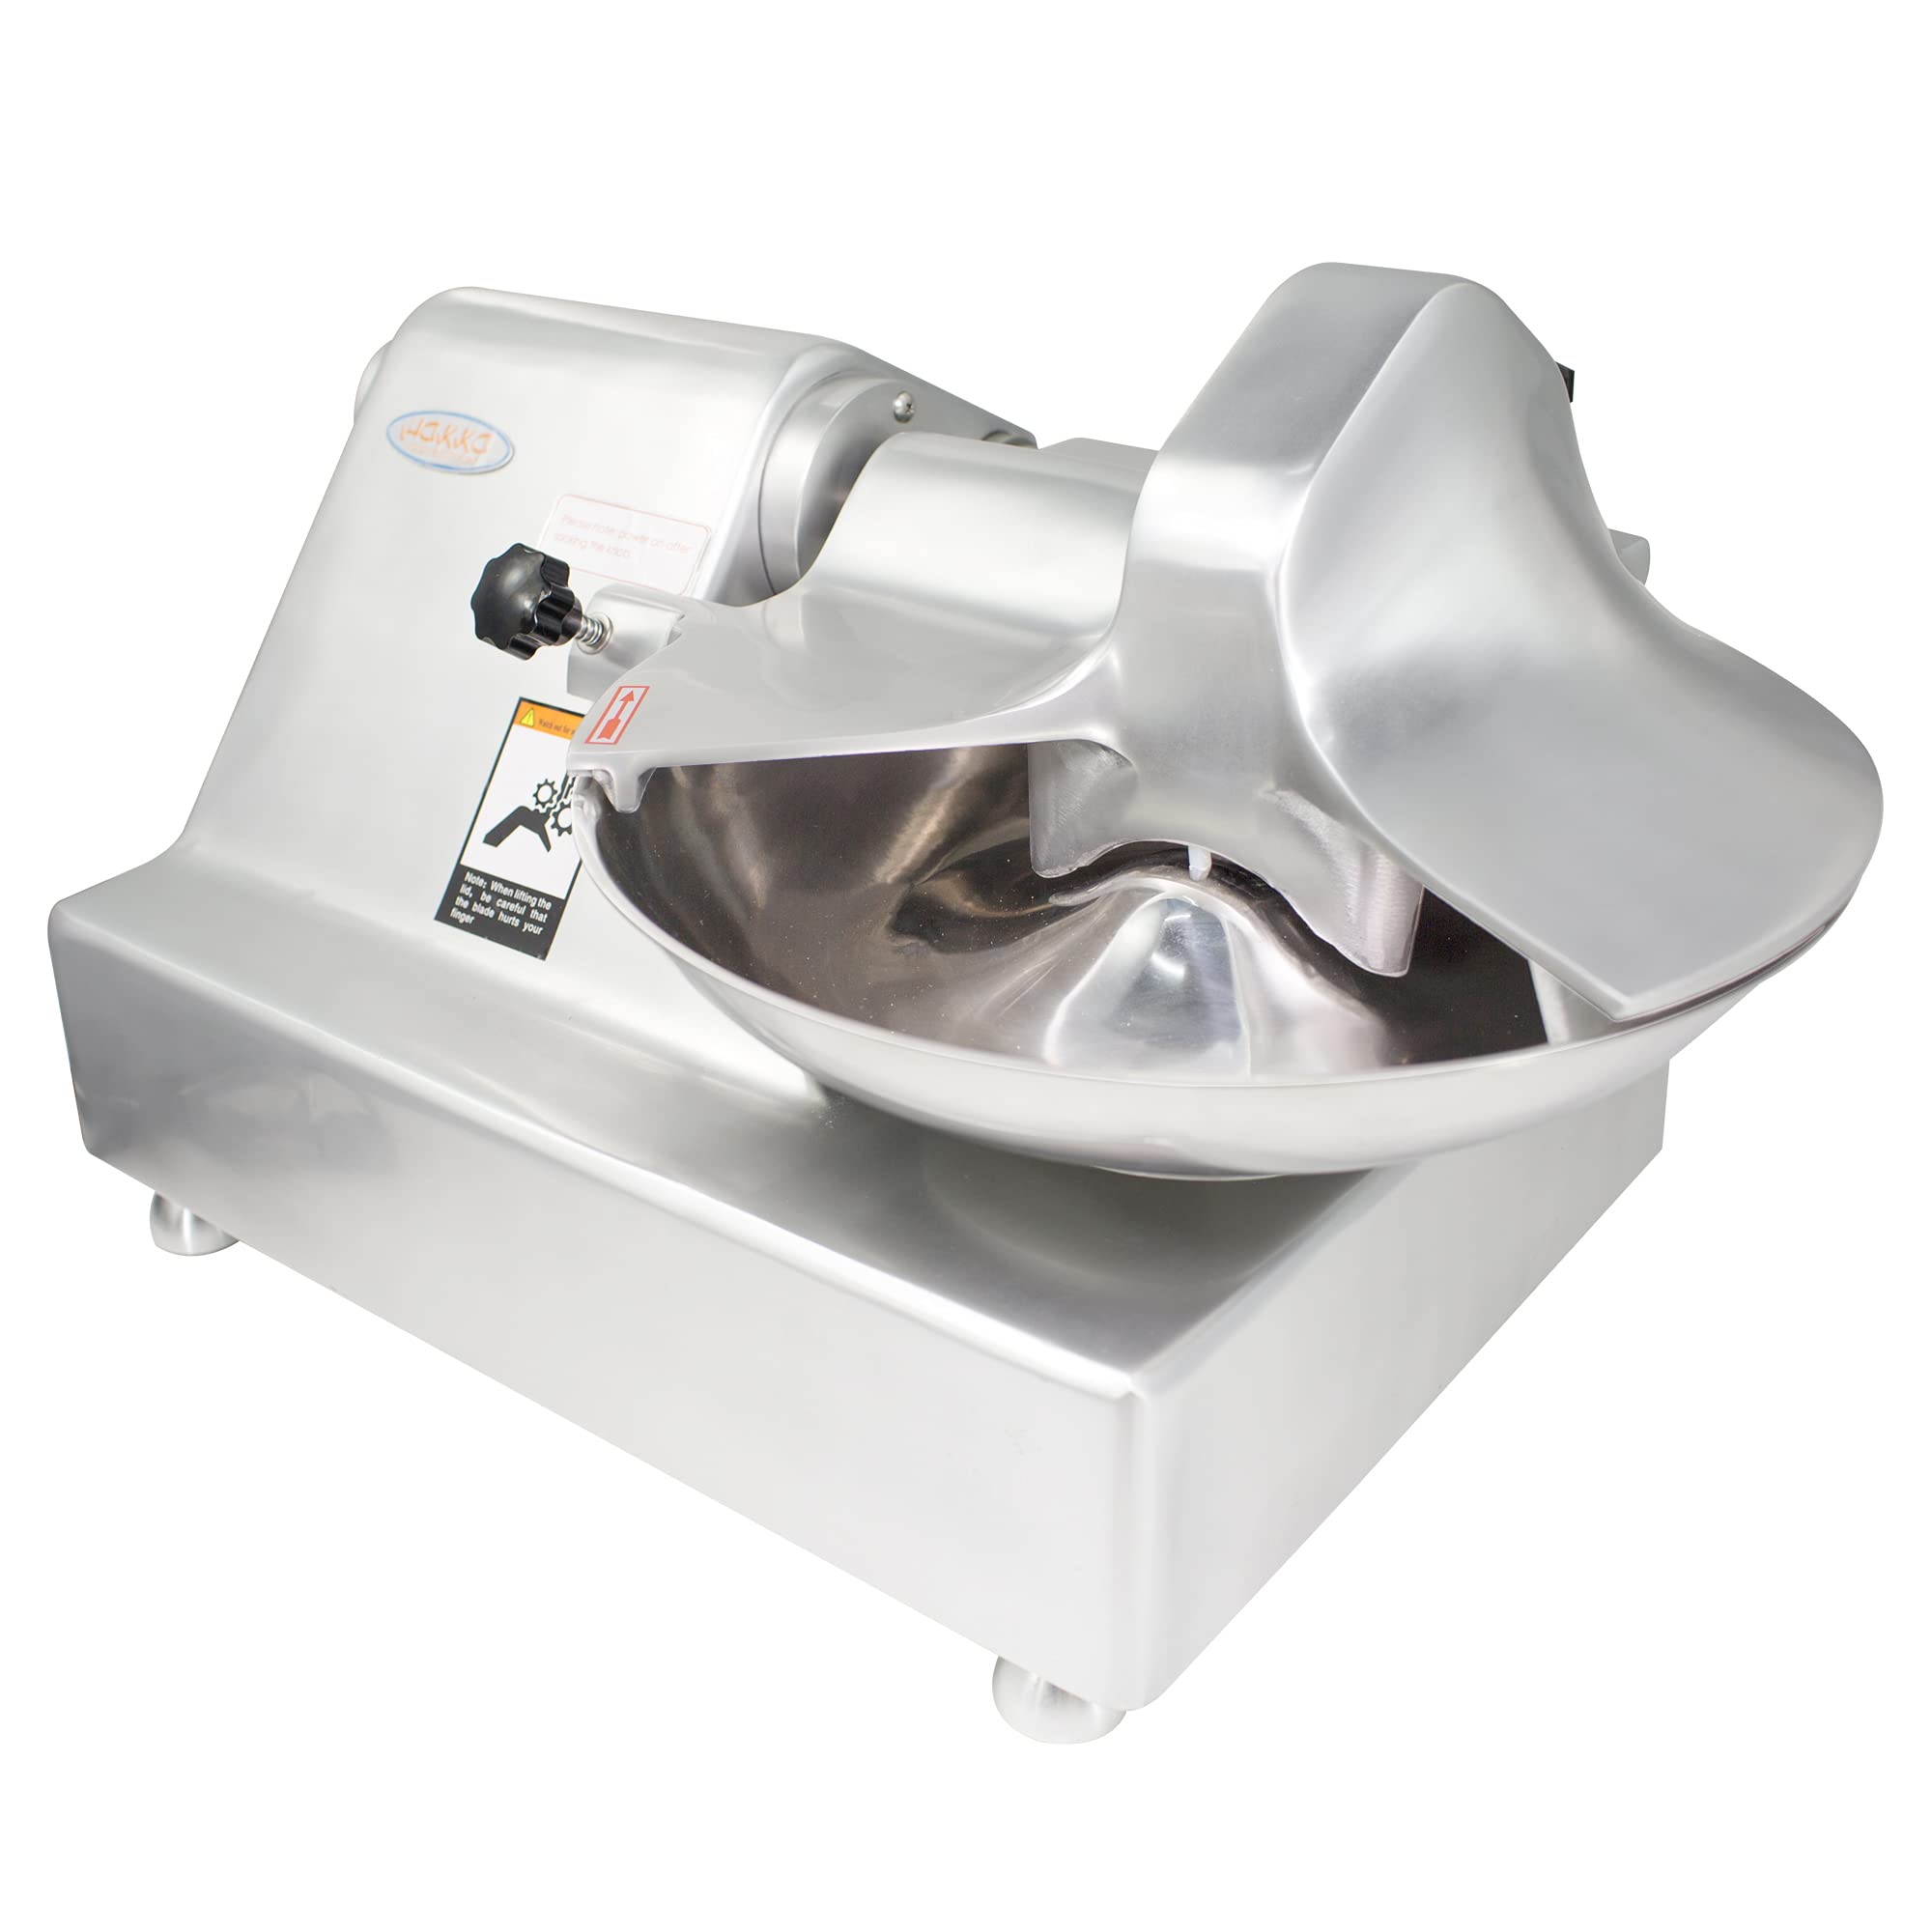 Hakka Commercial 5.5 L Multifunction Meat Bowl Cutter Mixer and Buffal –  Hakka Brothers Corp